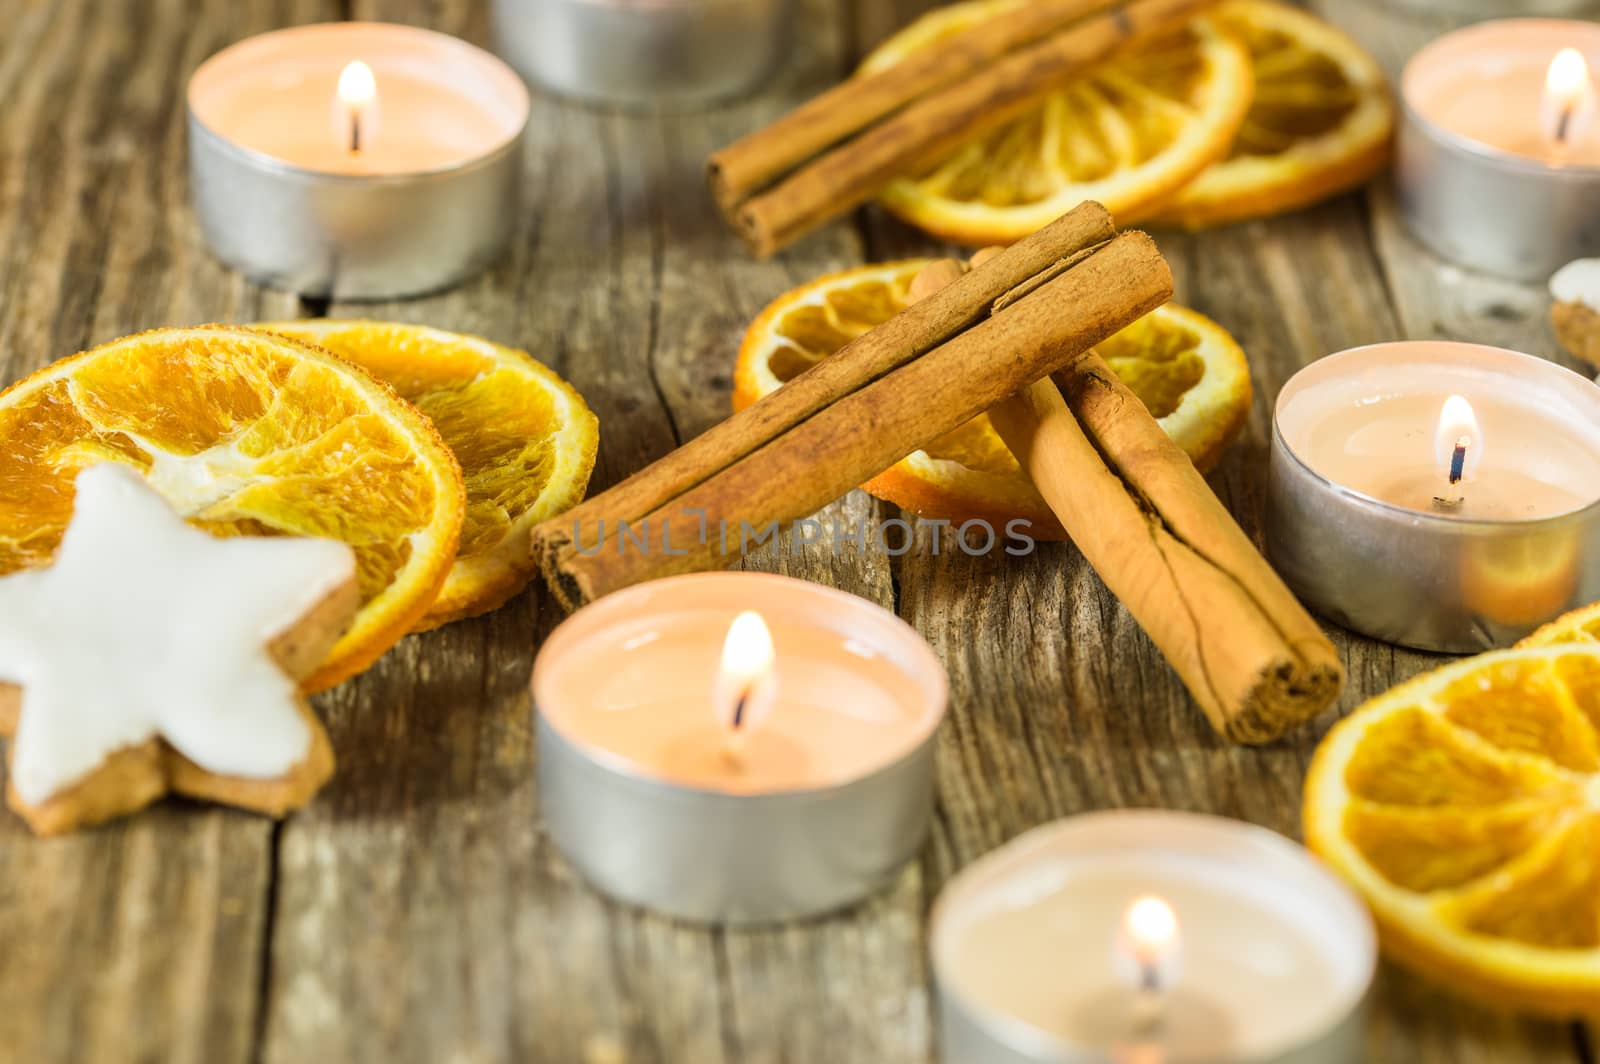 Christmas season decoration with candle flames, star shape cookies, cinnamon spice and orange slices